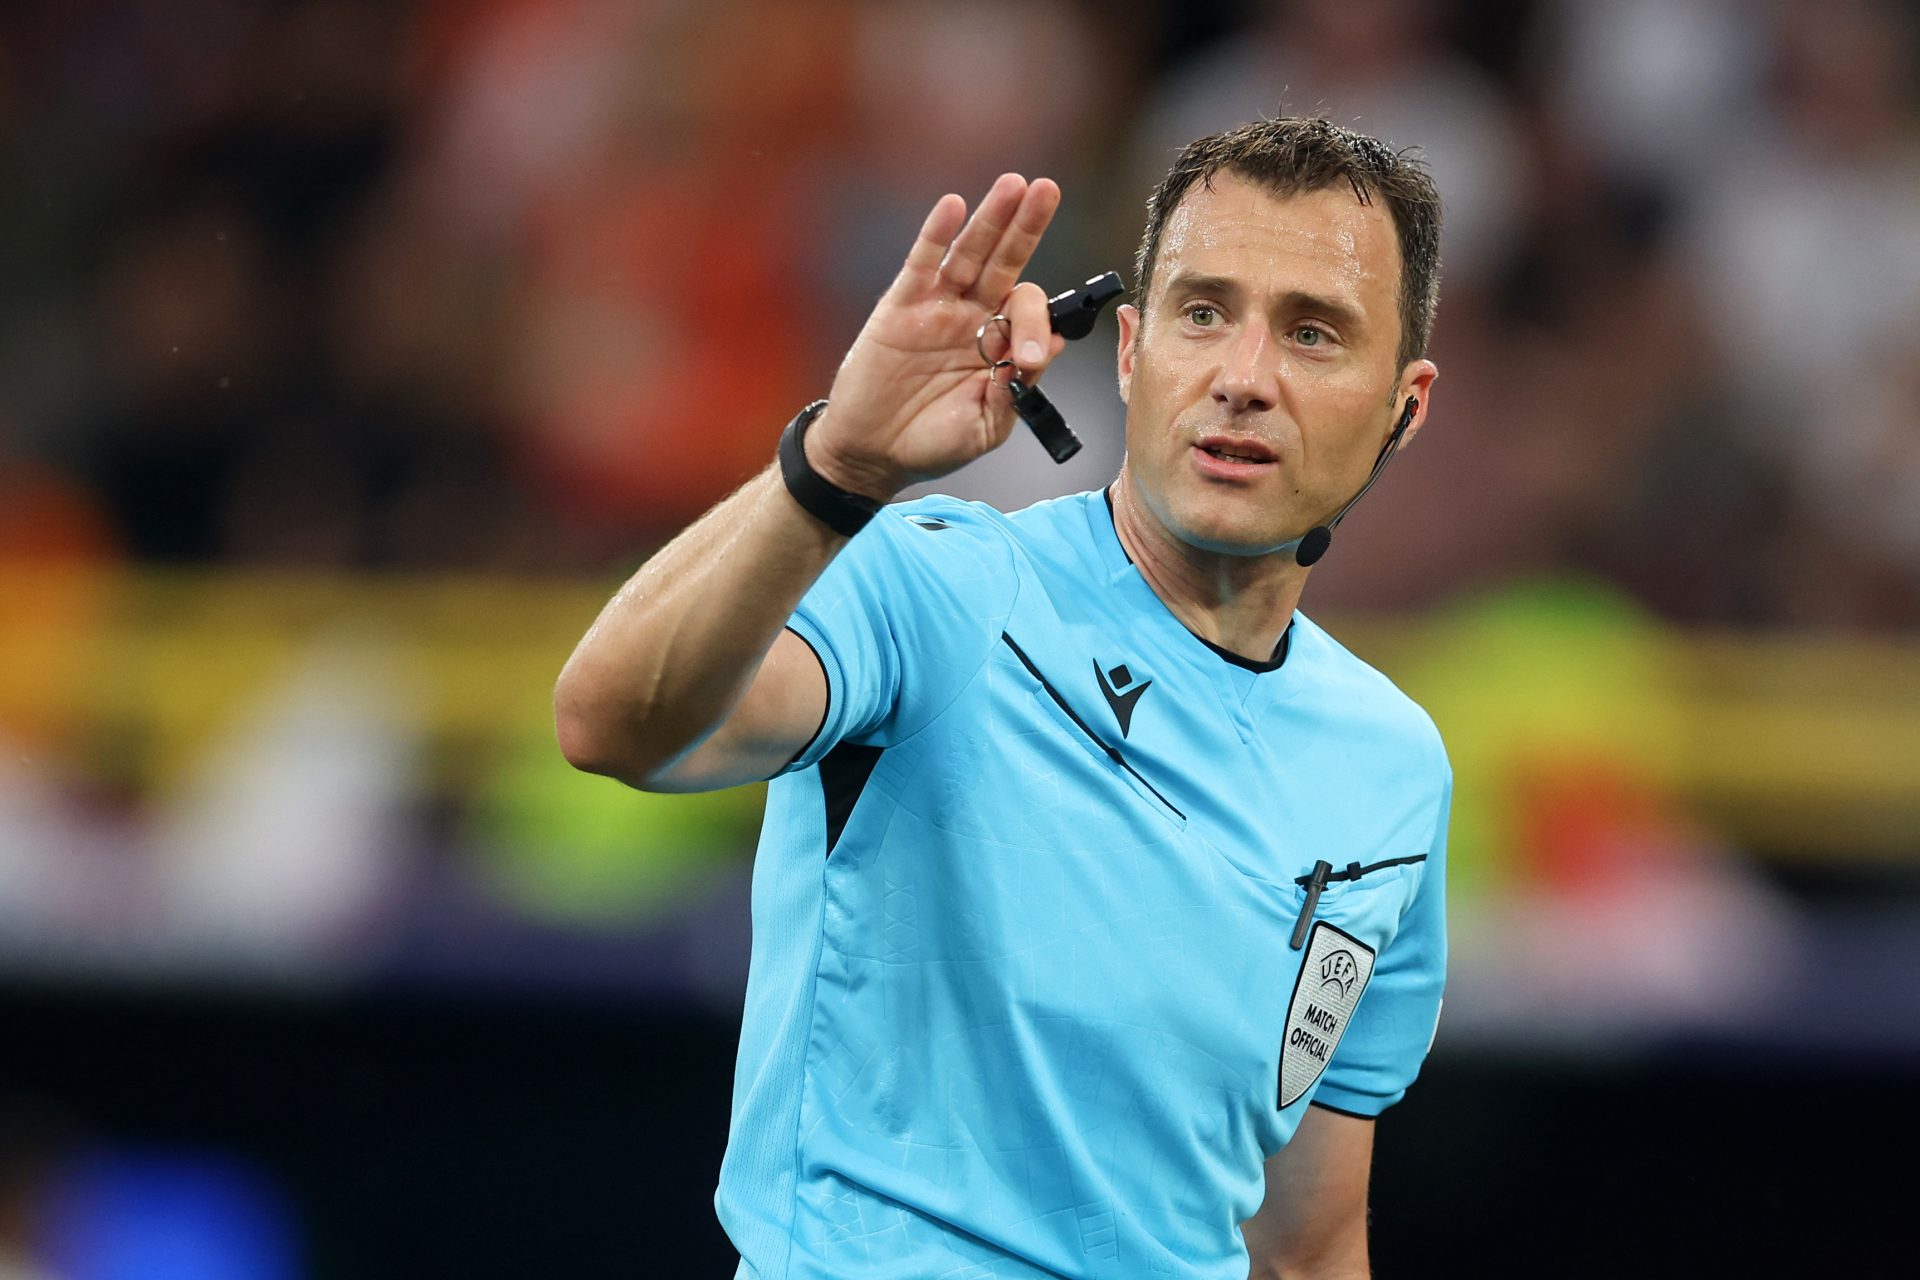 Felix Zwayer, the most controversial referee in Euros history?